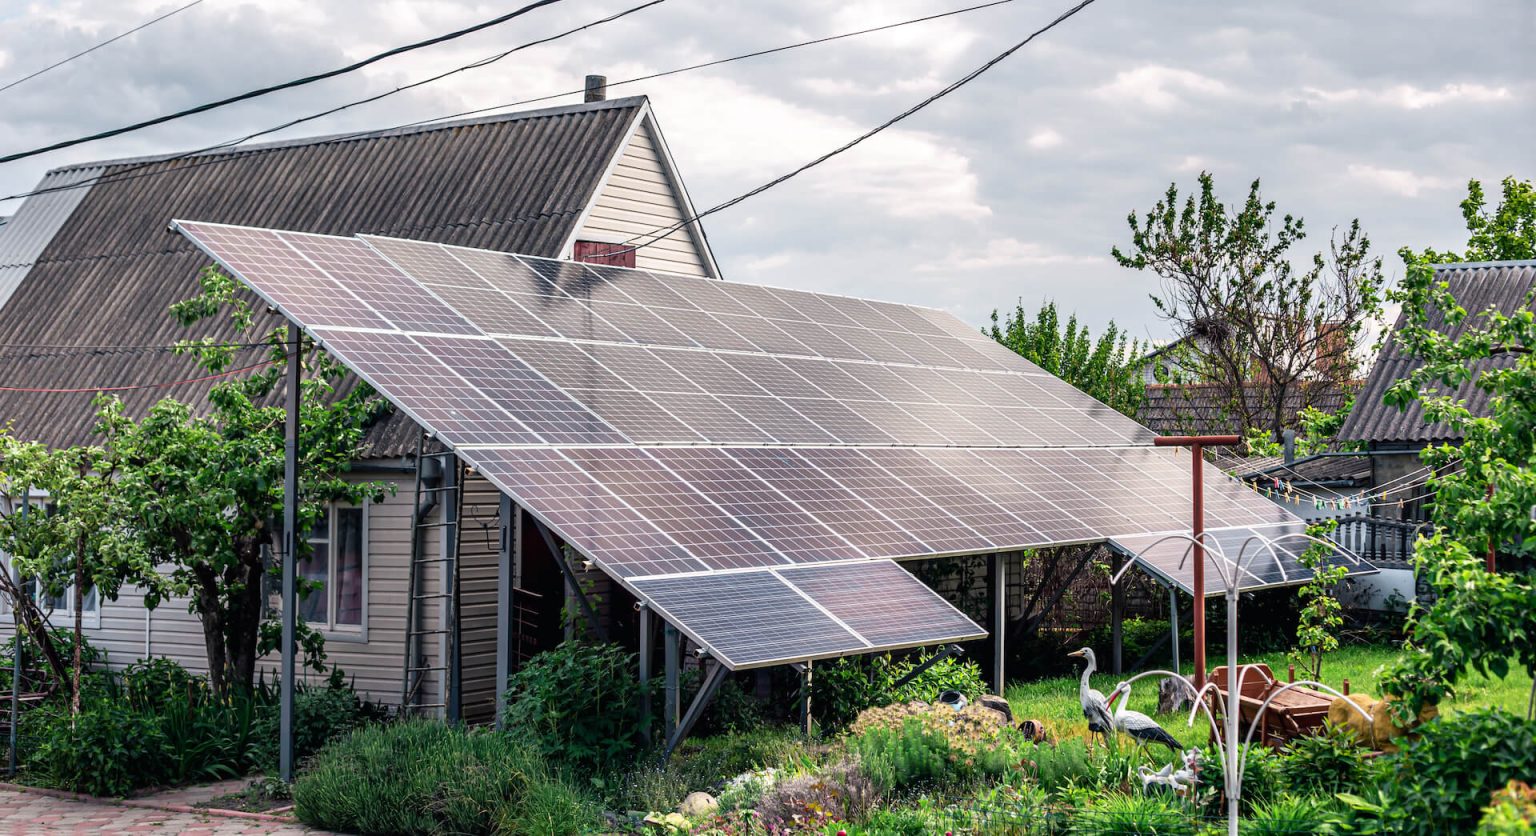 Photo of off-grid solar panels next to a home.